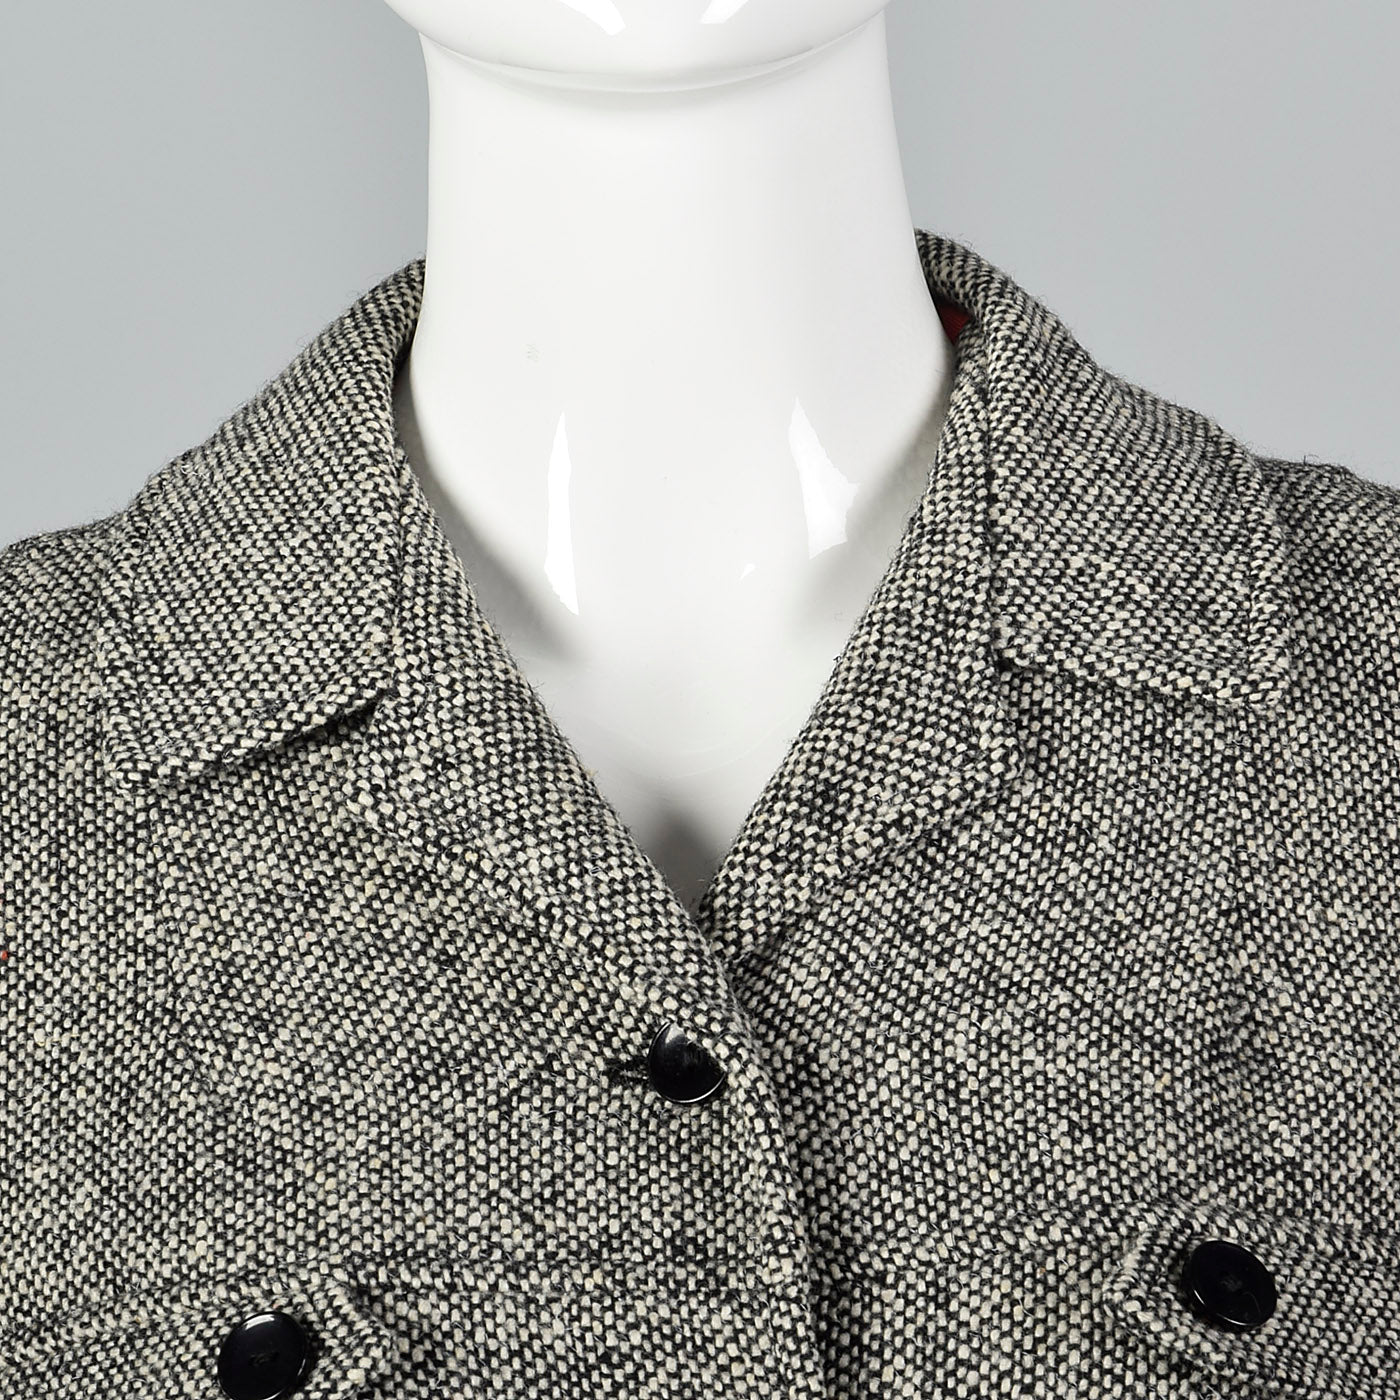 1960s Black and White Tweed Skirt Suit with Red Lining